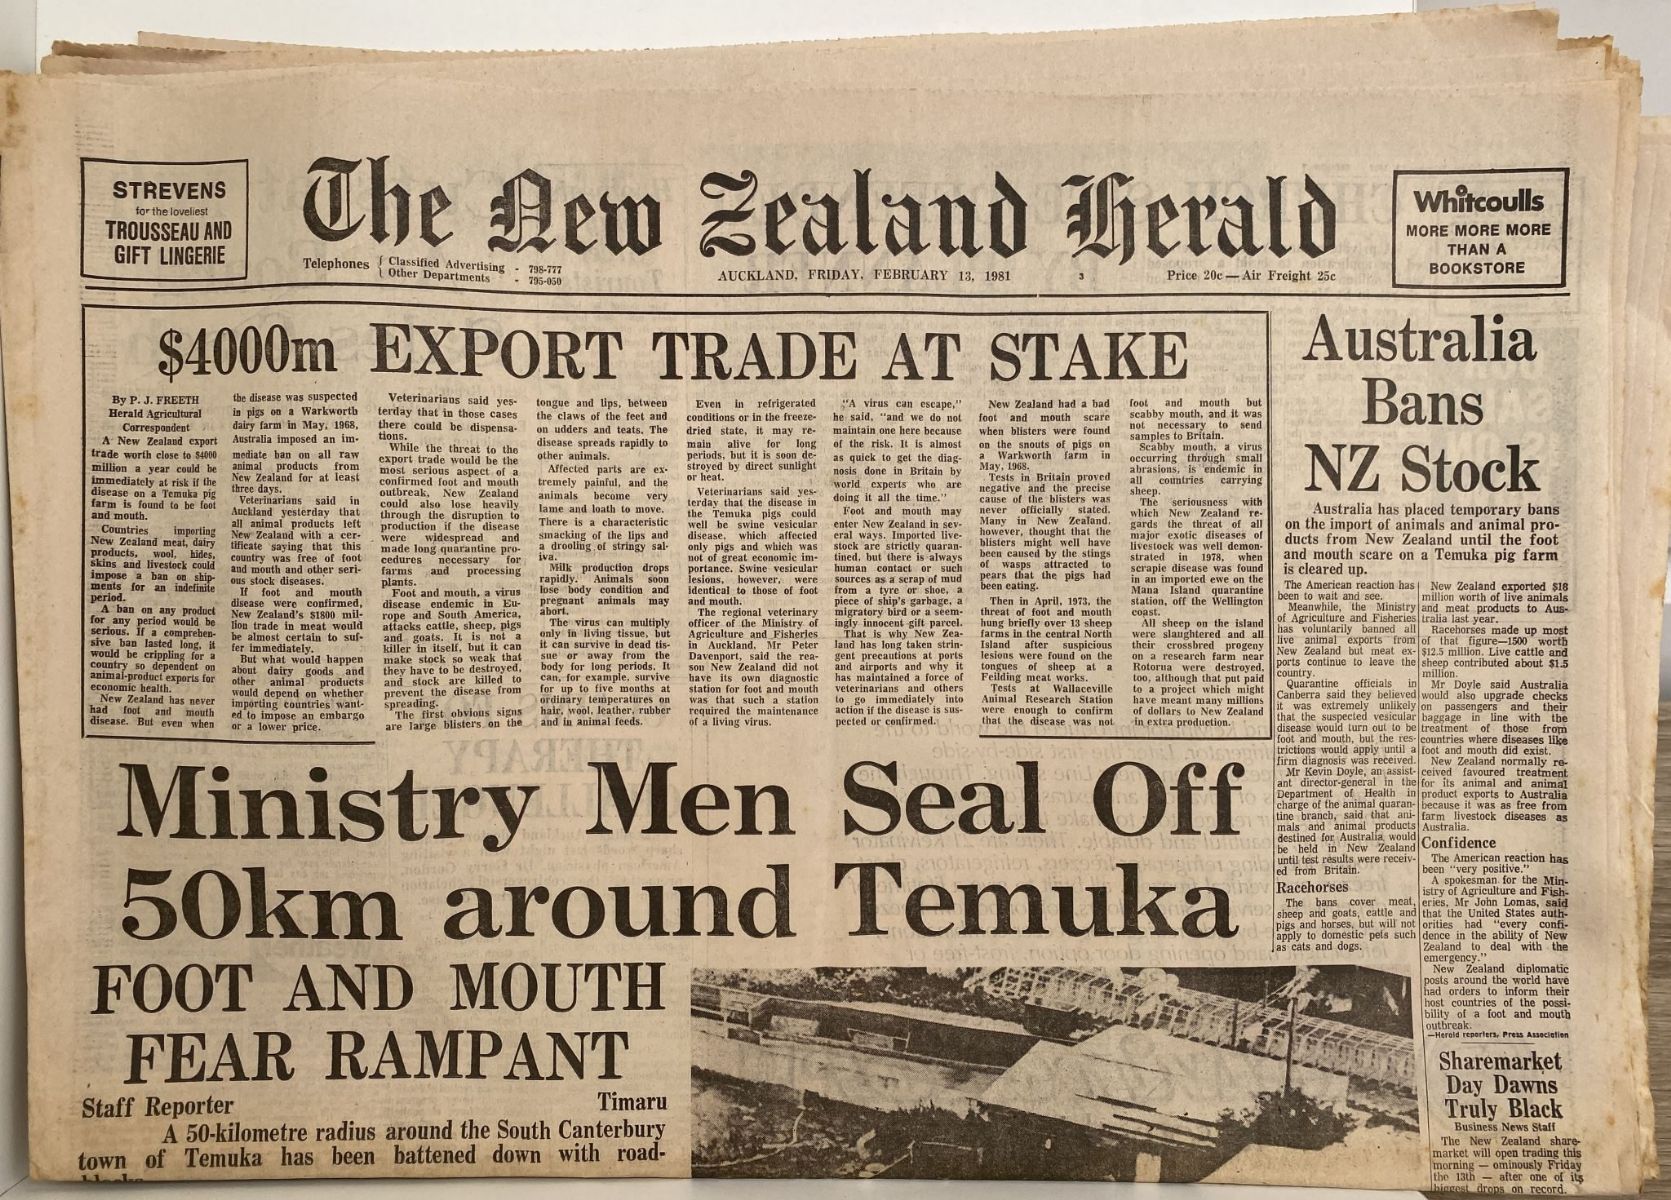 OLD NEWSPAPER: The New Zealand Herald, 13th February 1981 - Foot and mouth outbreak